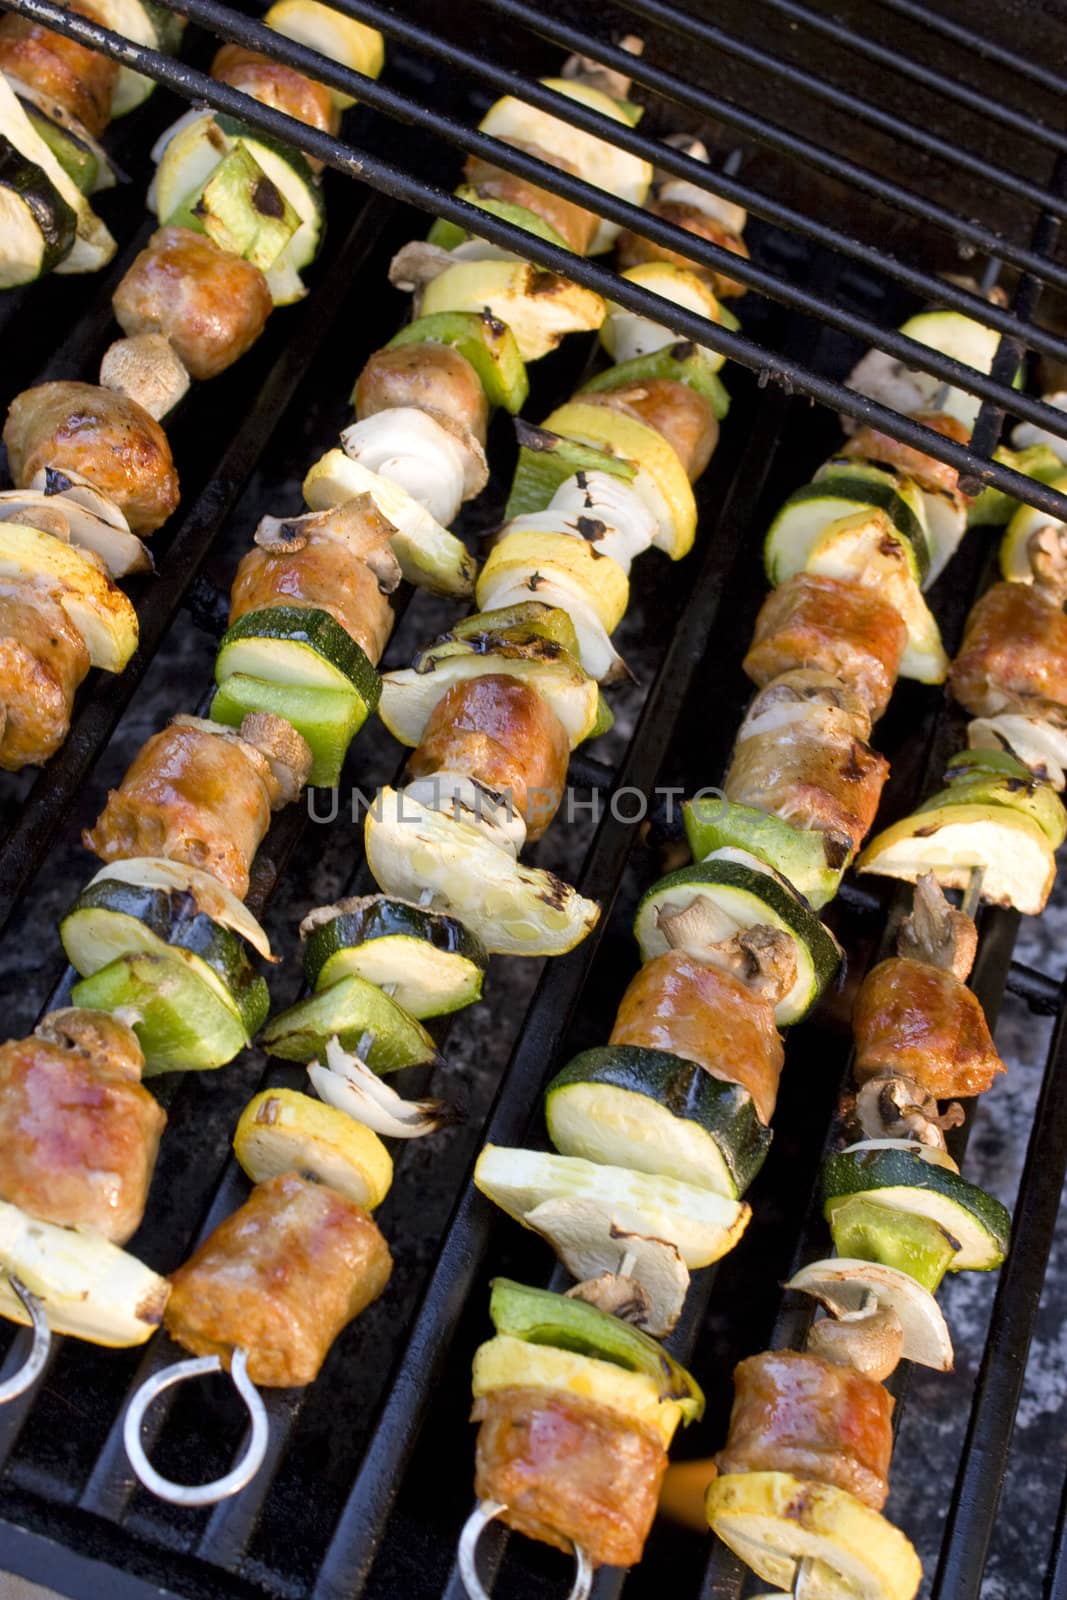 Sausage shish kebabs on skewers, cooking on the grill.